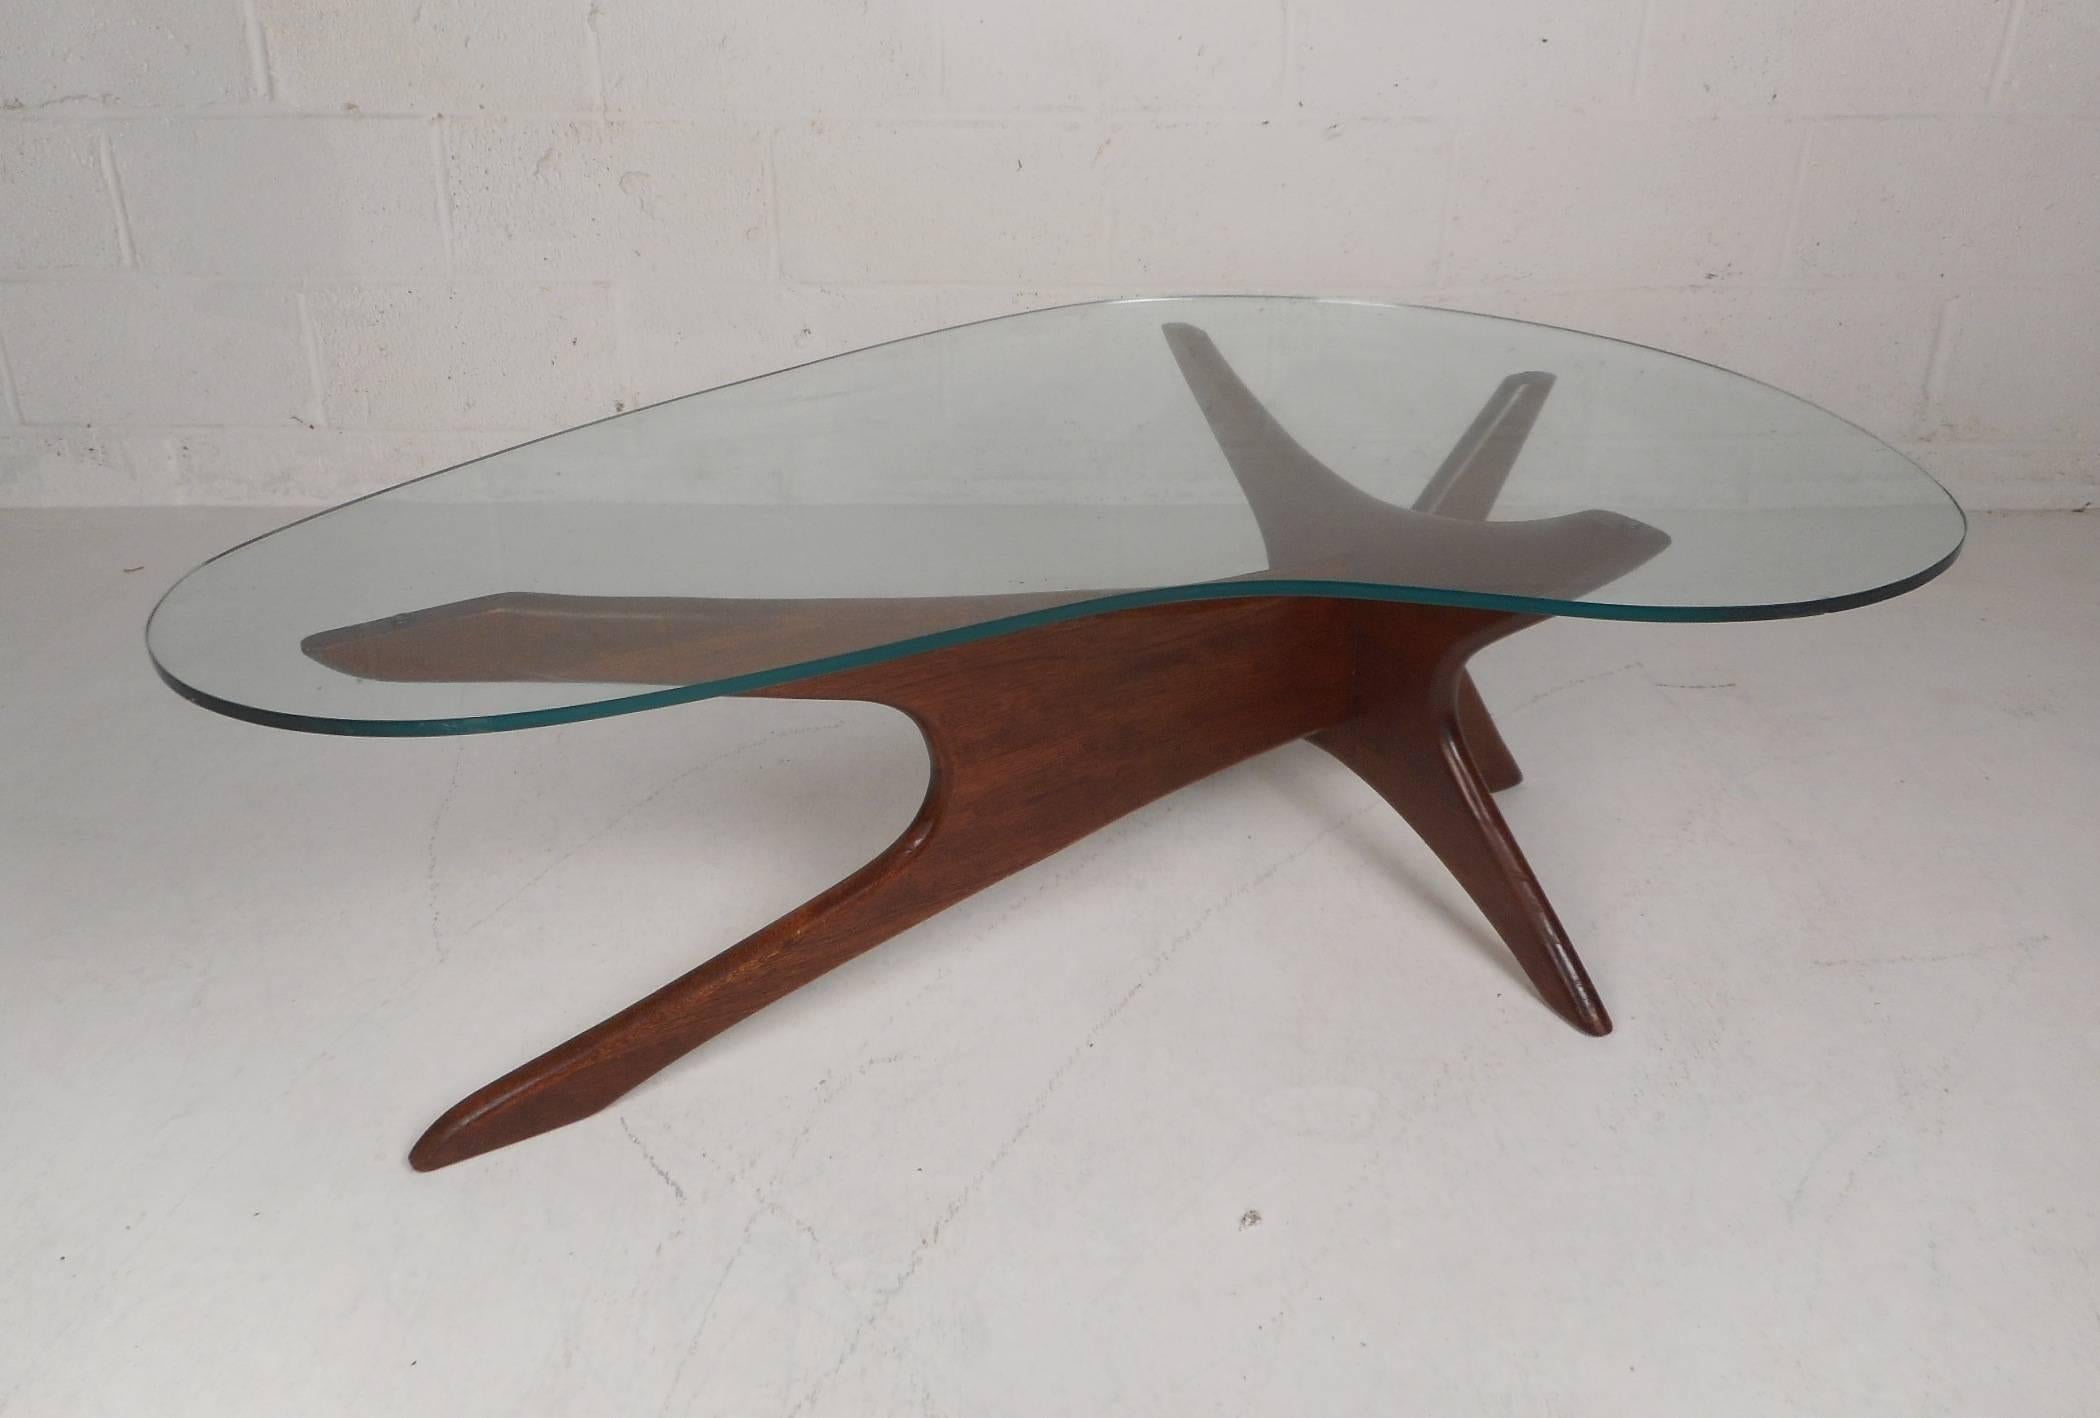 A stunning Mid-Century Modern amoeba shaped glass top coffee table by Adrian Pearsall. The unique walnut 